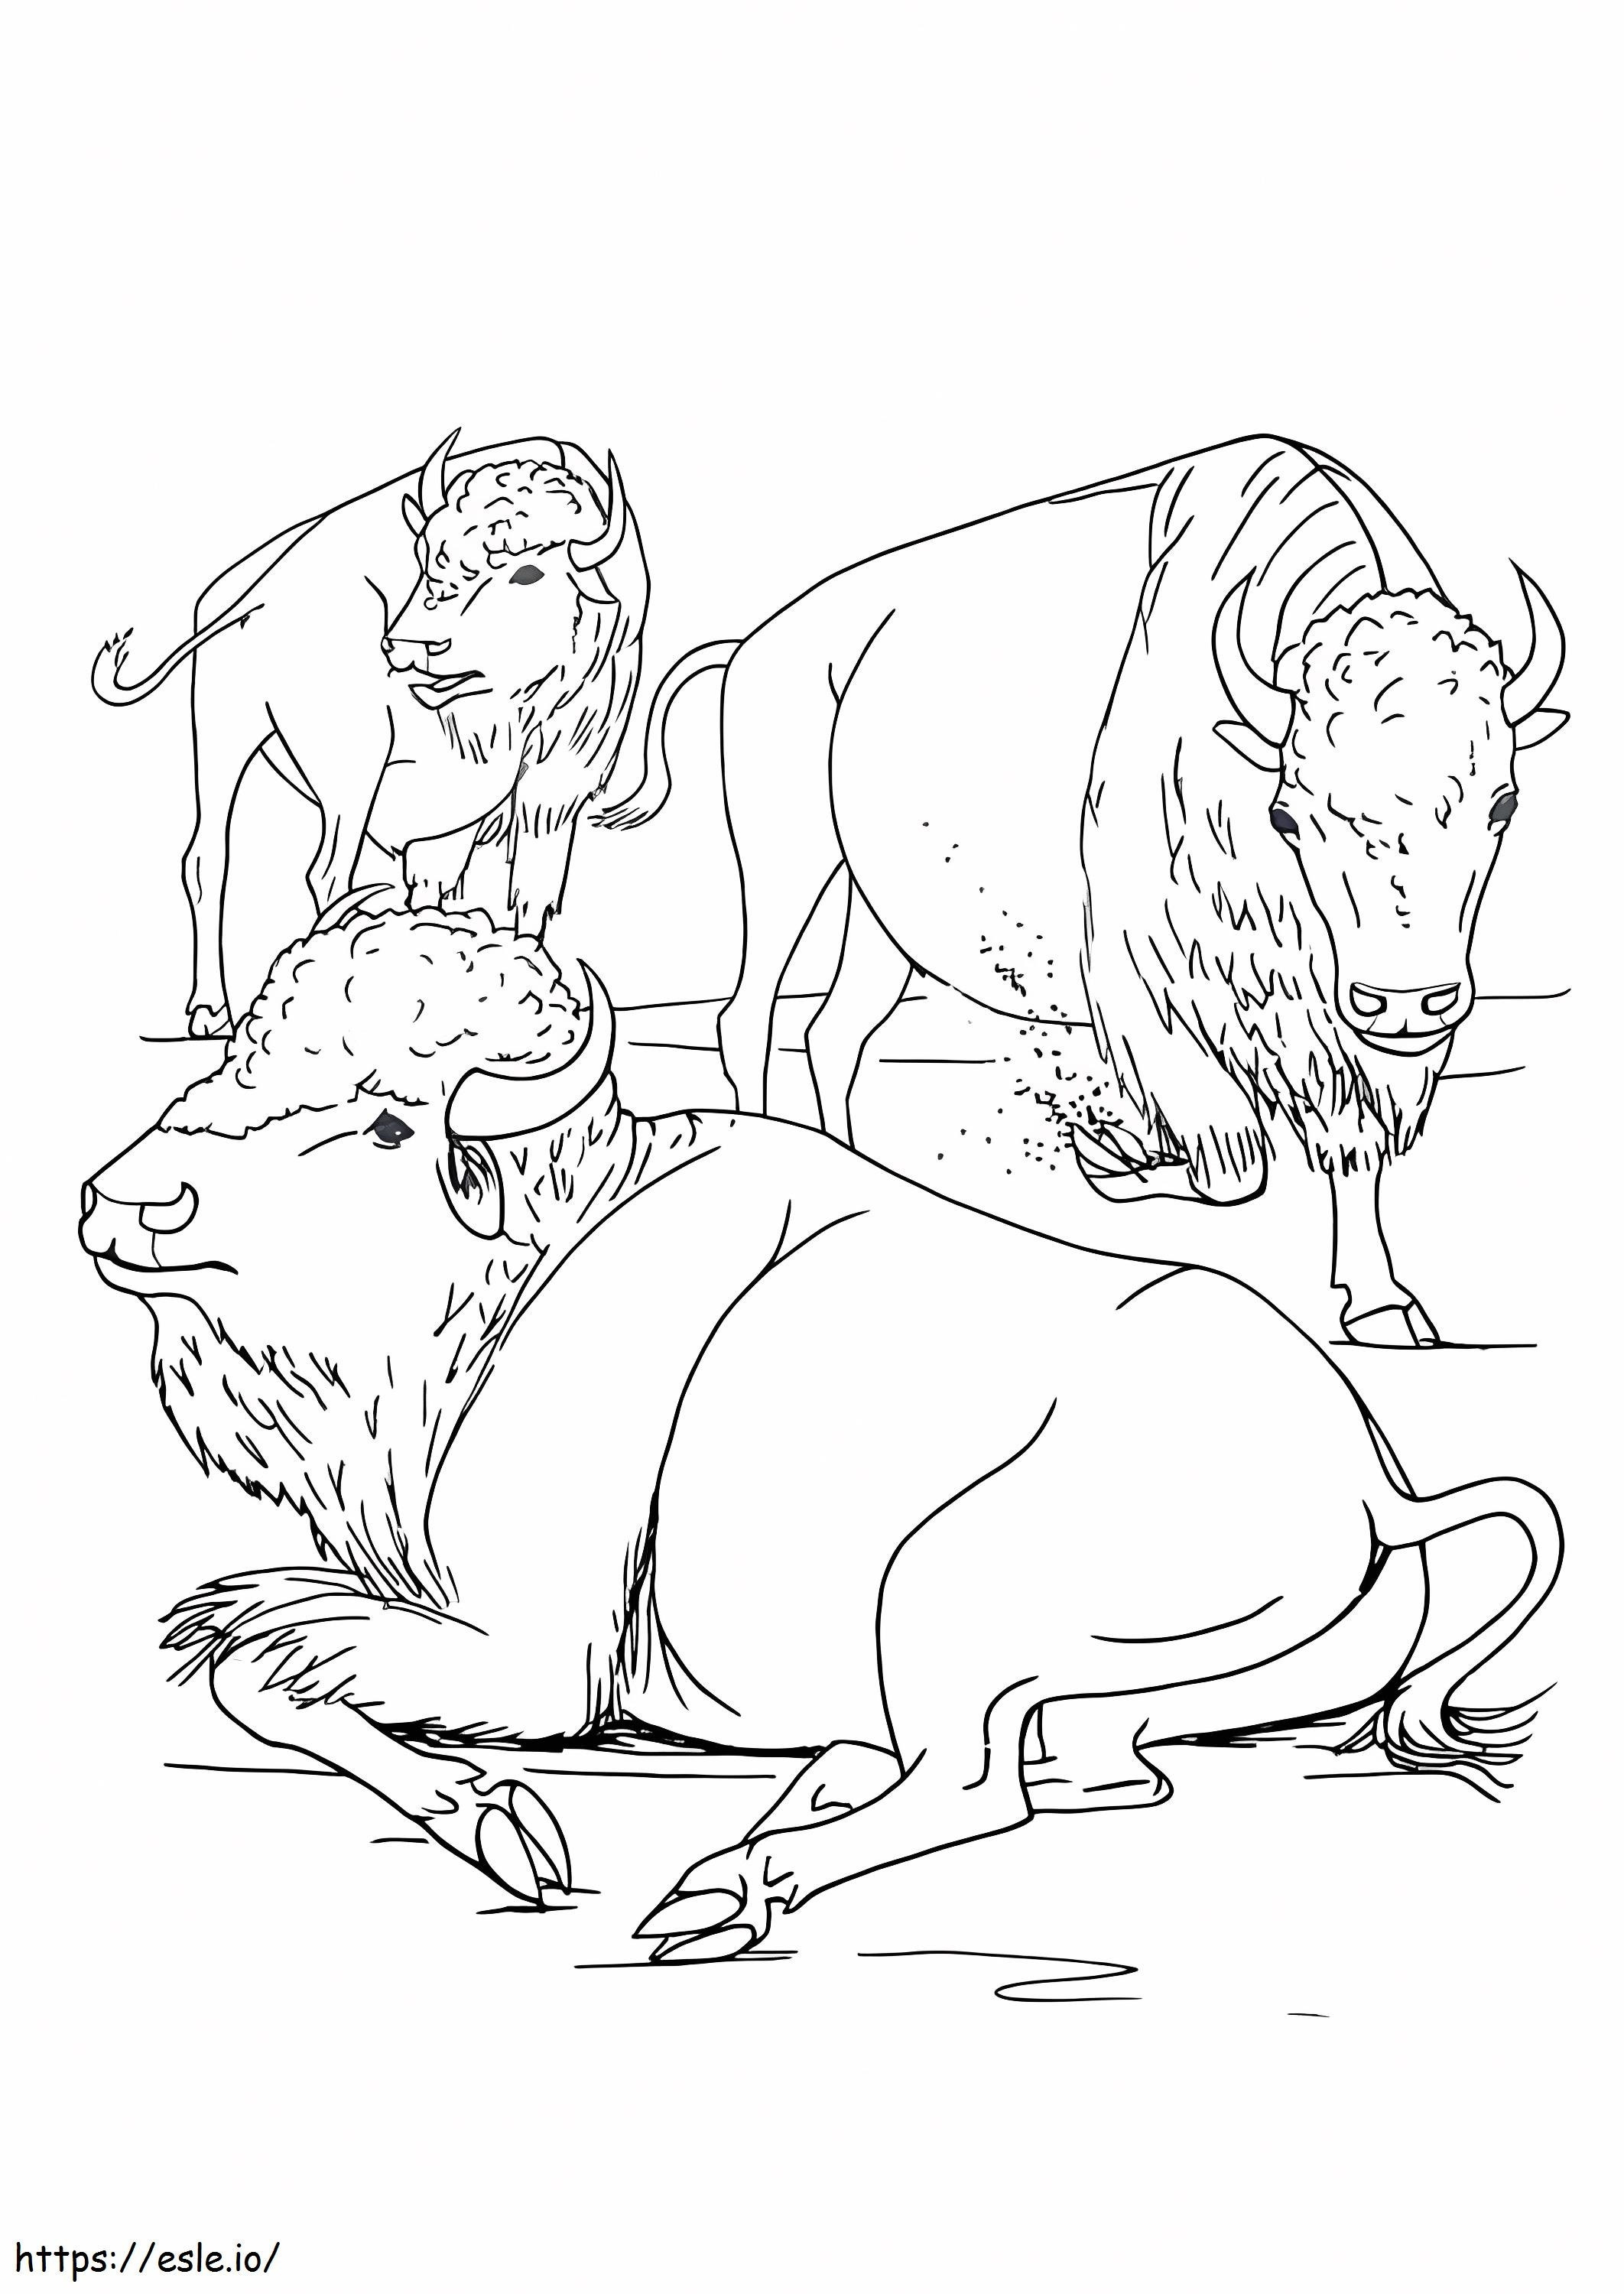 Three Bison coloring page